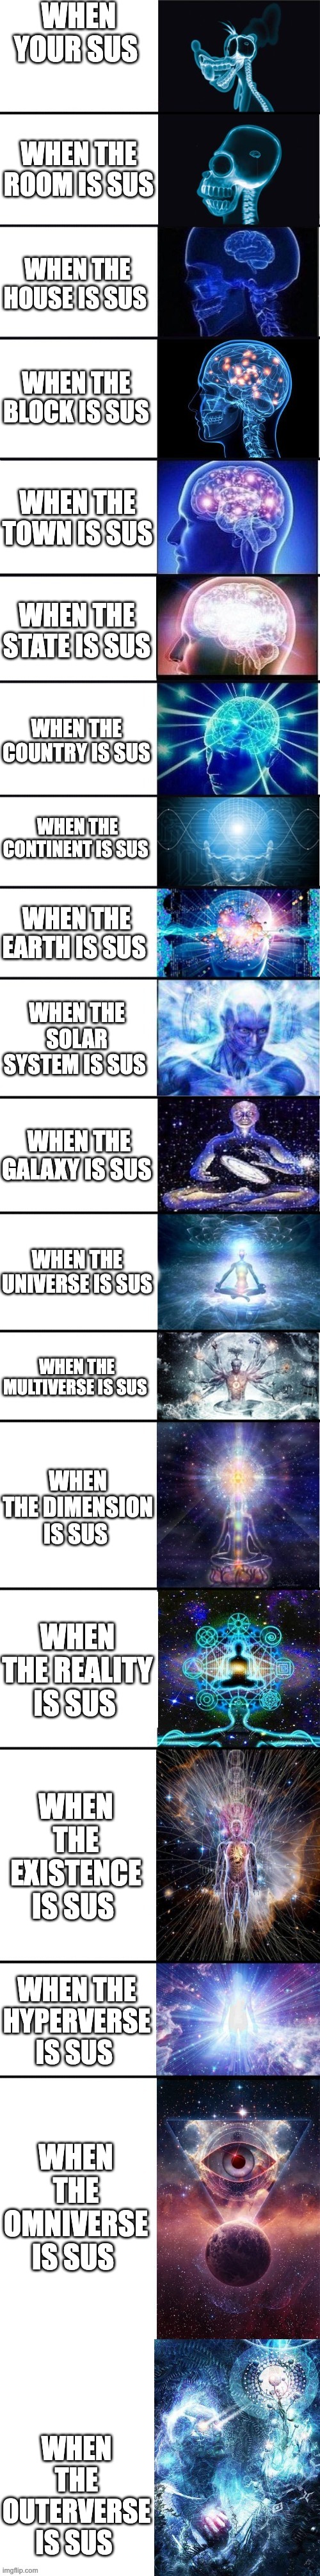 top stages of sus | WHEN YOUR SUS; WHEN THE ROOM IS SUS; WHEN THE HOUSE IS SUS; WHEN THE BLOCK IS SUS; WHEN THE TOWN IS SUS; WHEN THE STATE IS SUS; WHEN THE COUNTRY IS SUS; WHEN THE CONTINENT IS SUS; WHEN THE EARTH IS SUS; WHEN THE SOLAR SYSTEM IS SUS; WHEN THE GALAXY IS SUS; WHEN THE UNIVERSE IS SUS; WHEN THE MULTIVERSE IS SUS; WHEN THE DIMENSION IS SUS; WHEN THE REALITY IS SUS; WHEN THE EXISTENCE IS SUS; WHEN THE HYPERVERSE IS SUS; WHEN THE OMNIVERSE IS SUS; WHEN THE OUTERVERSE IS SUS | image tagged in expanding brain 13 stages | made w/ Imgflip meme maker